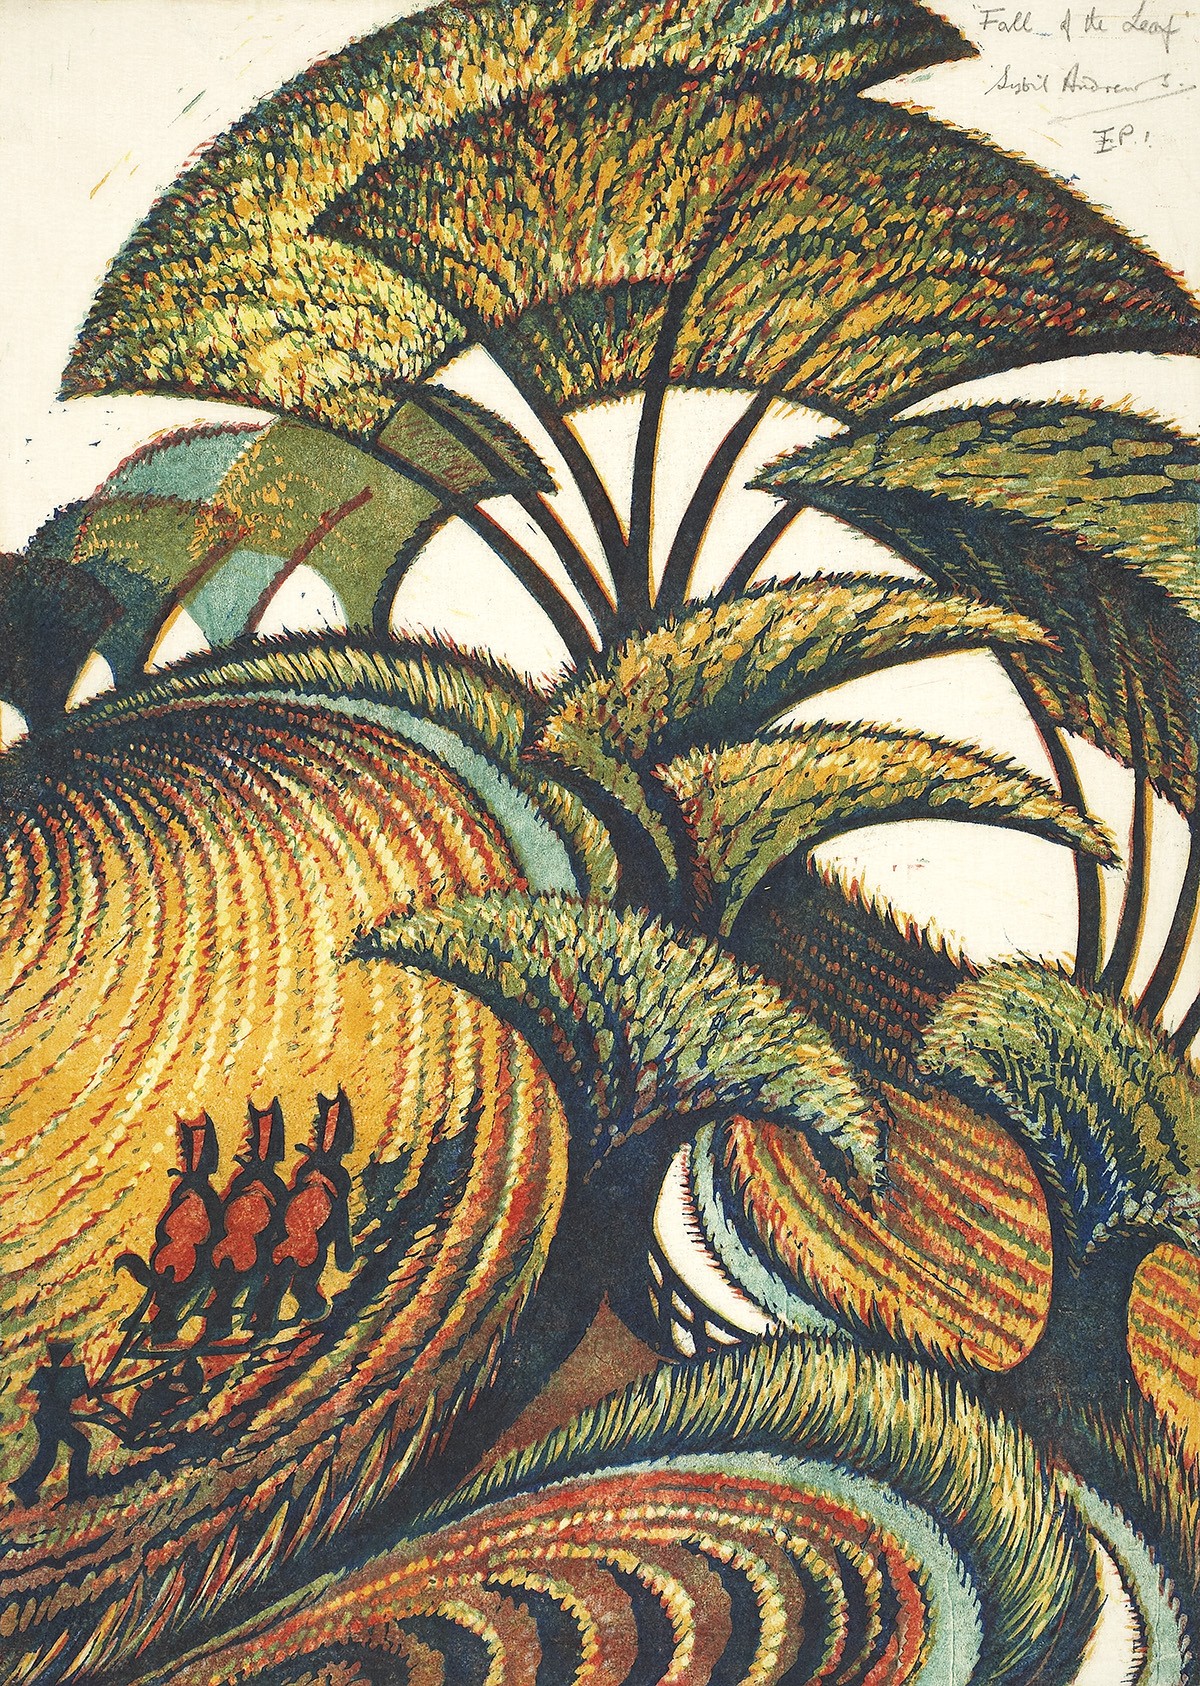 'Fall of the Leaf' by Sybil Andrews